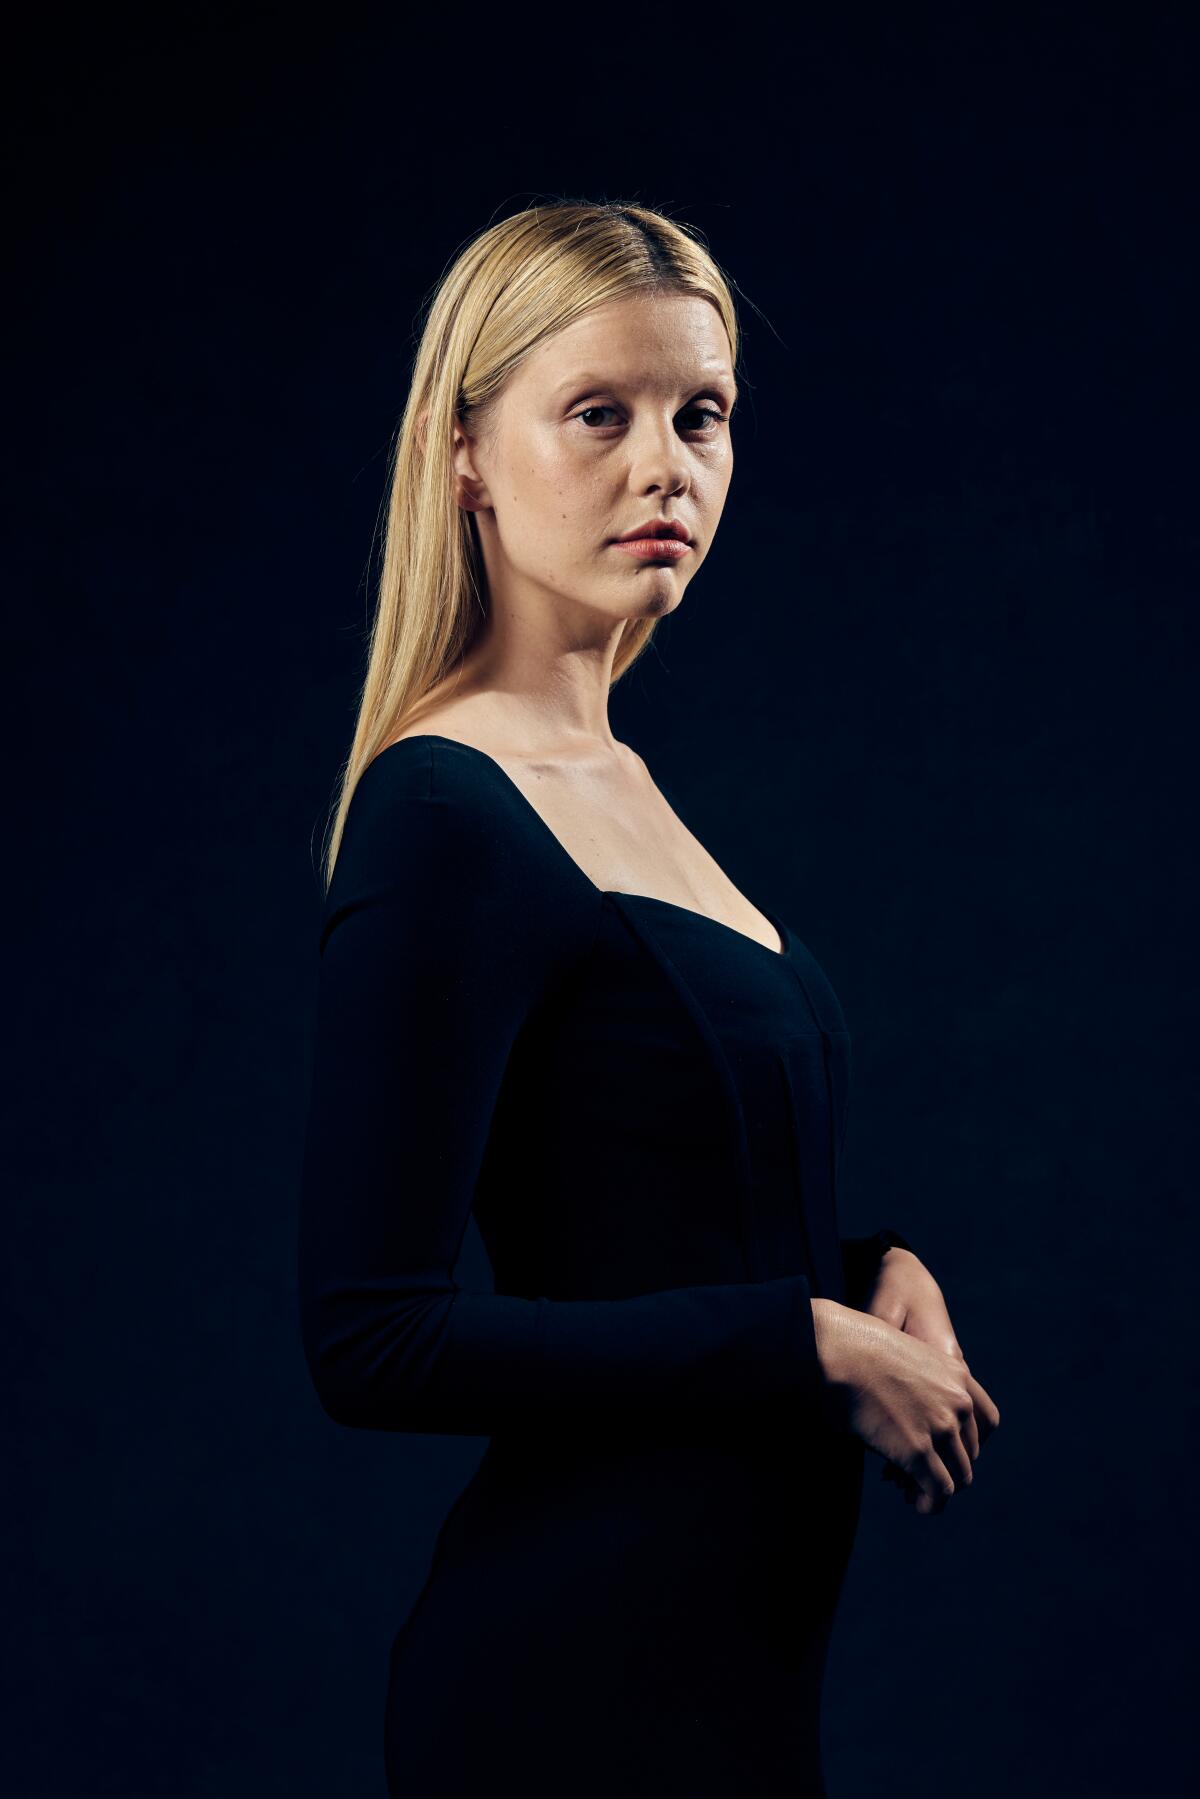 A woman with long blond hair poses in a black outfit.